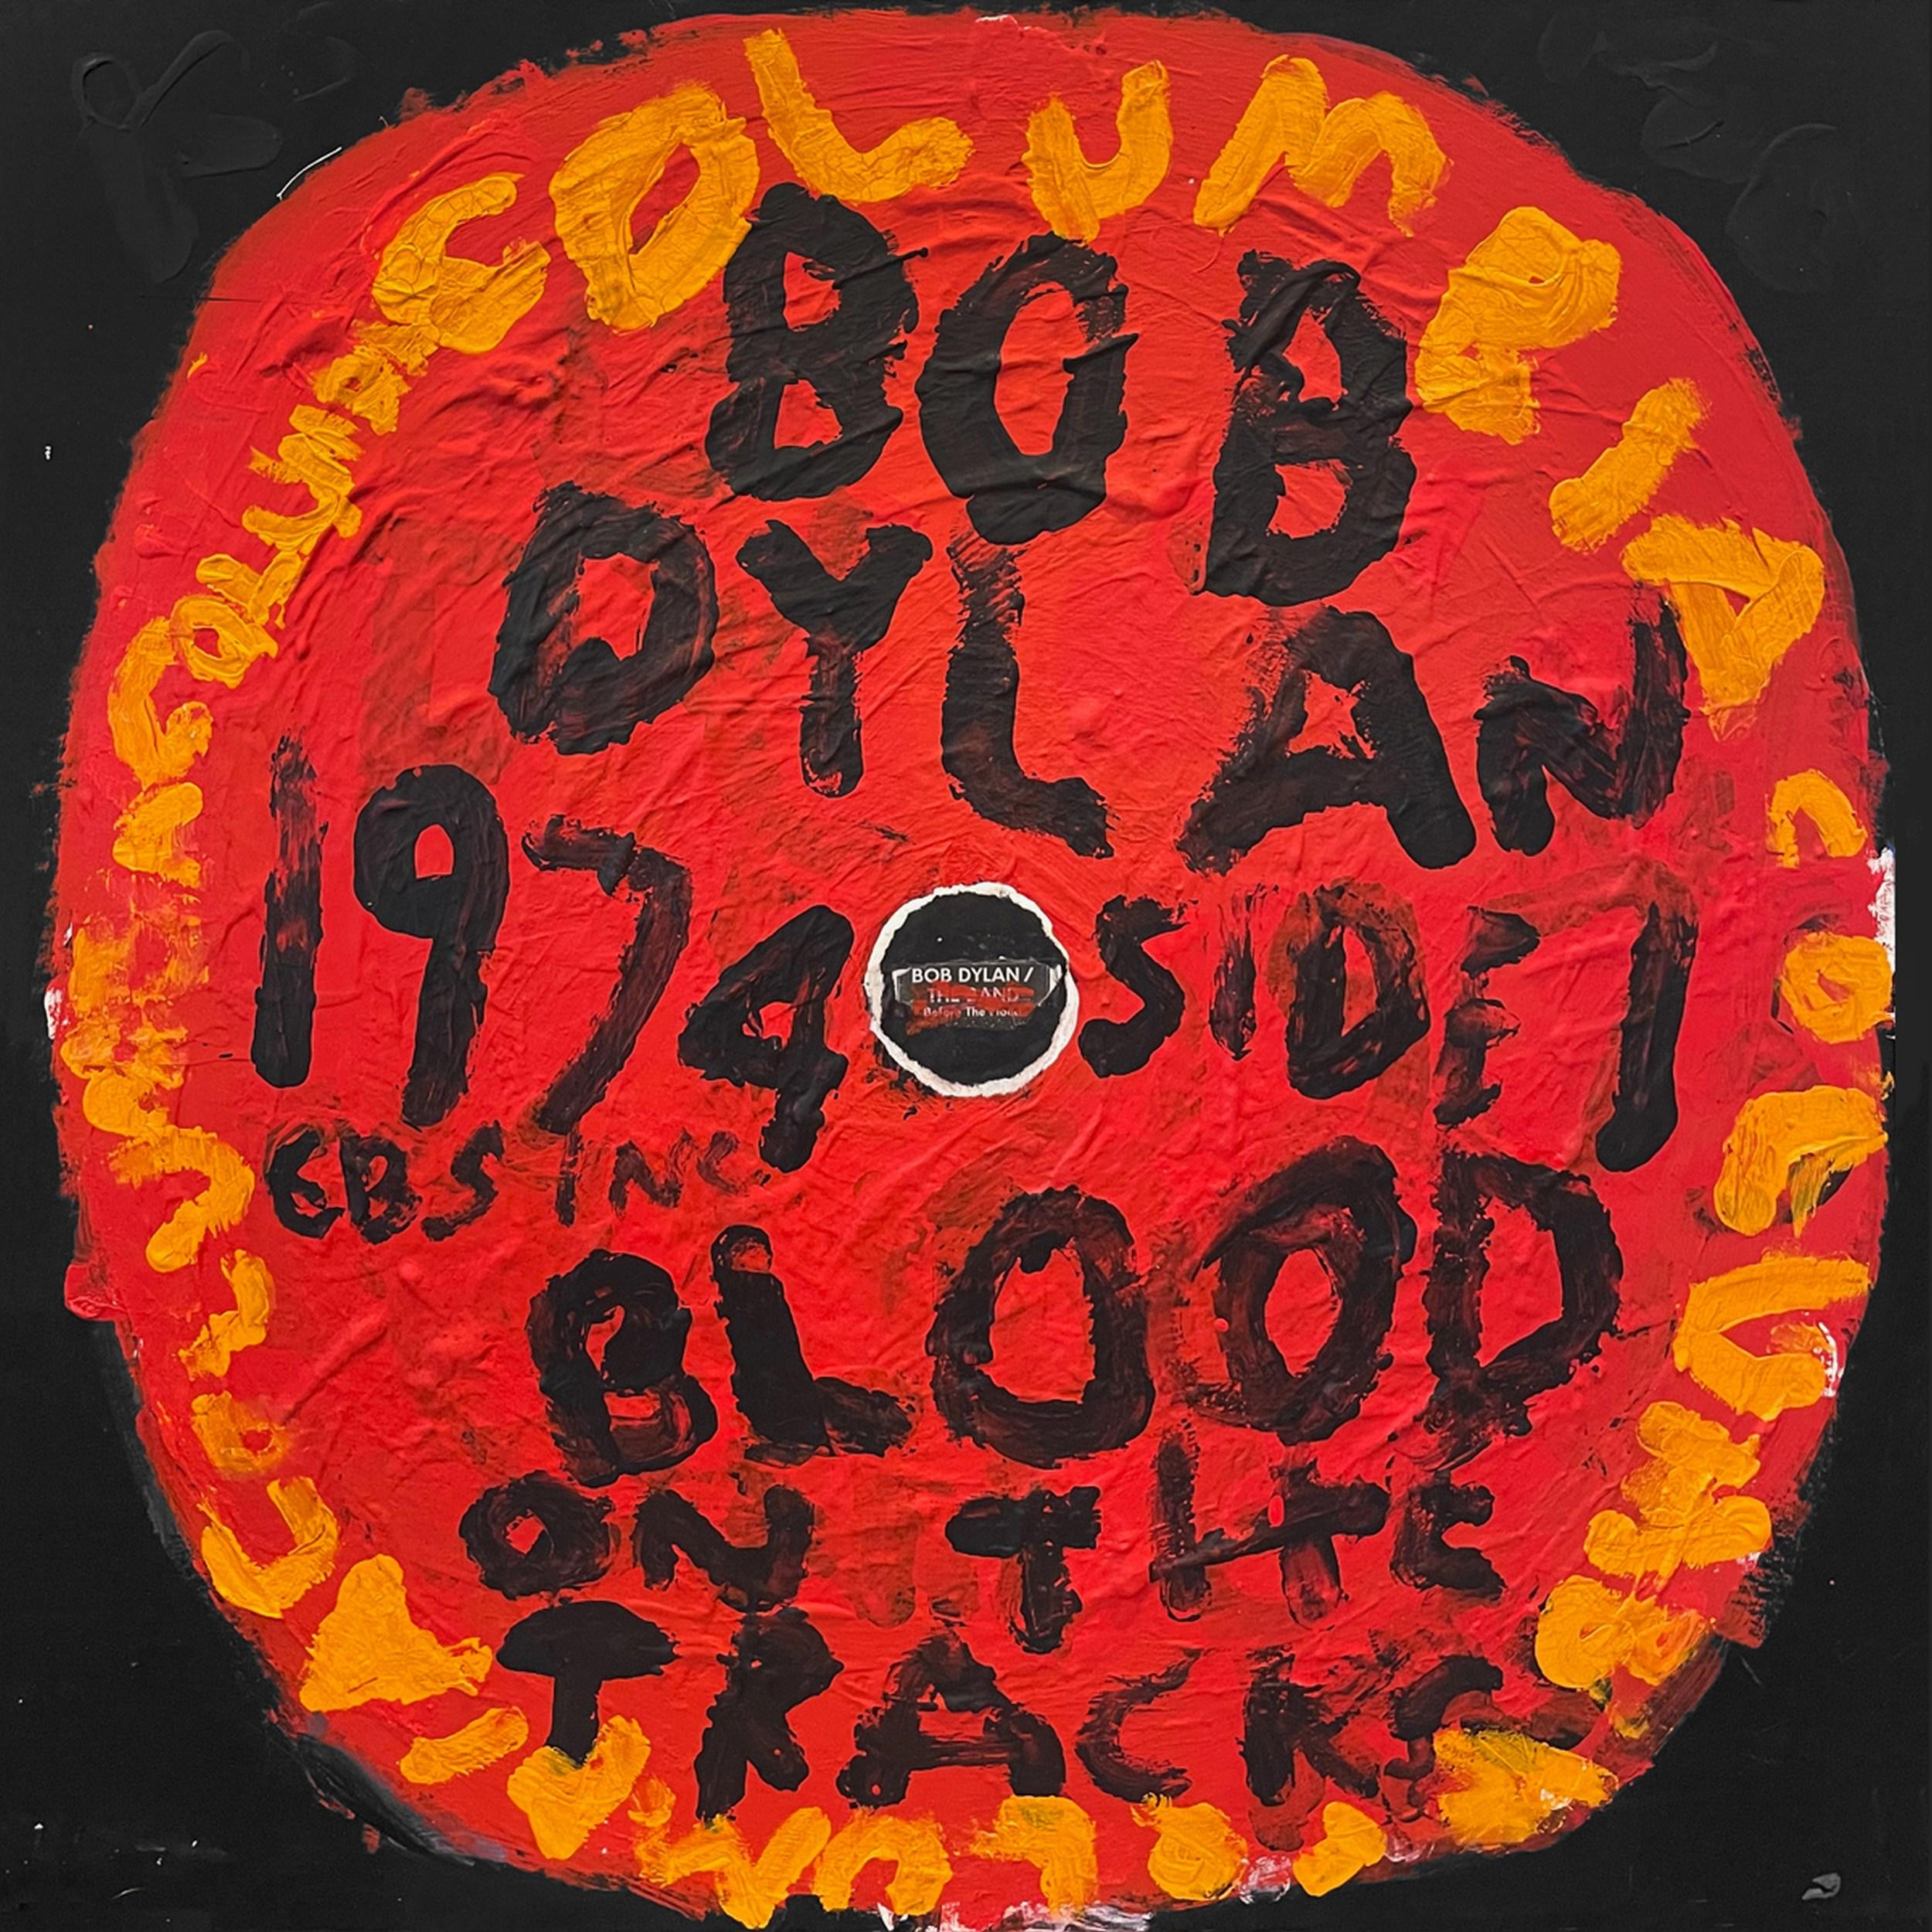 Kerry Smith Abstract Painting – Bob Dylan - Blood On The Tracks (Grammy, Albumkunst, Ikonische, Volksmusik, Rock)